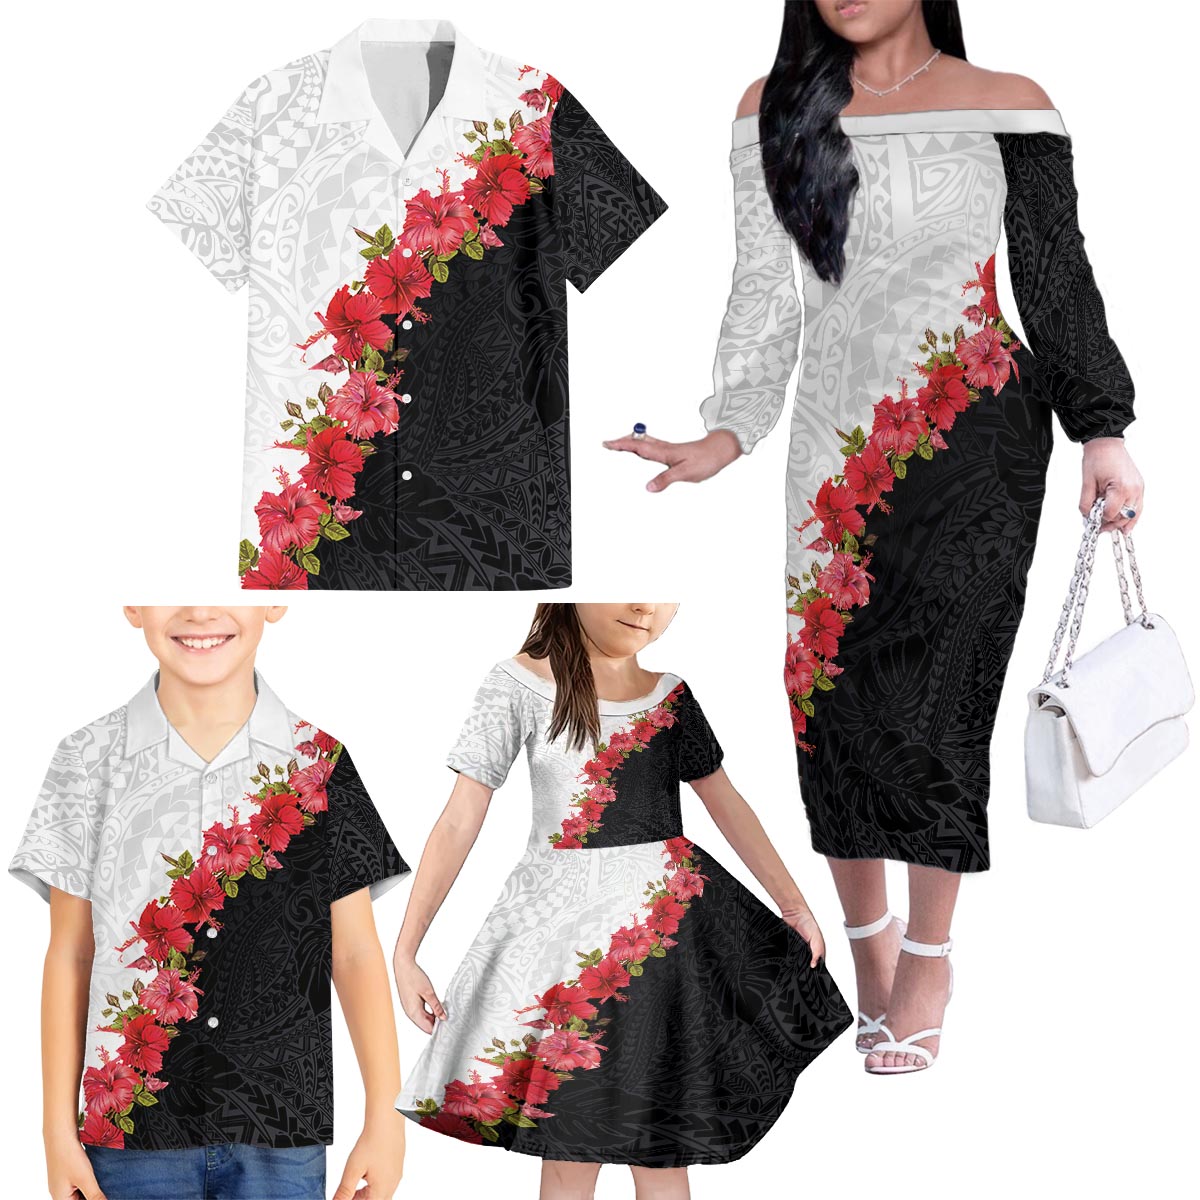 Hawaii Red Hibiscus Flowers Family Matching Off The Shoulder Long Sleeve Dress and Hawaiian Shirt Polynesian Pattern With Half Black White Version